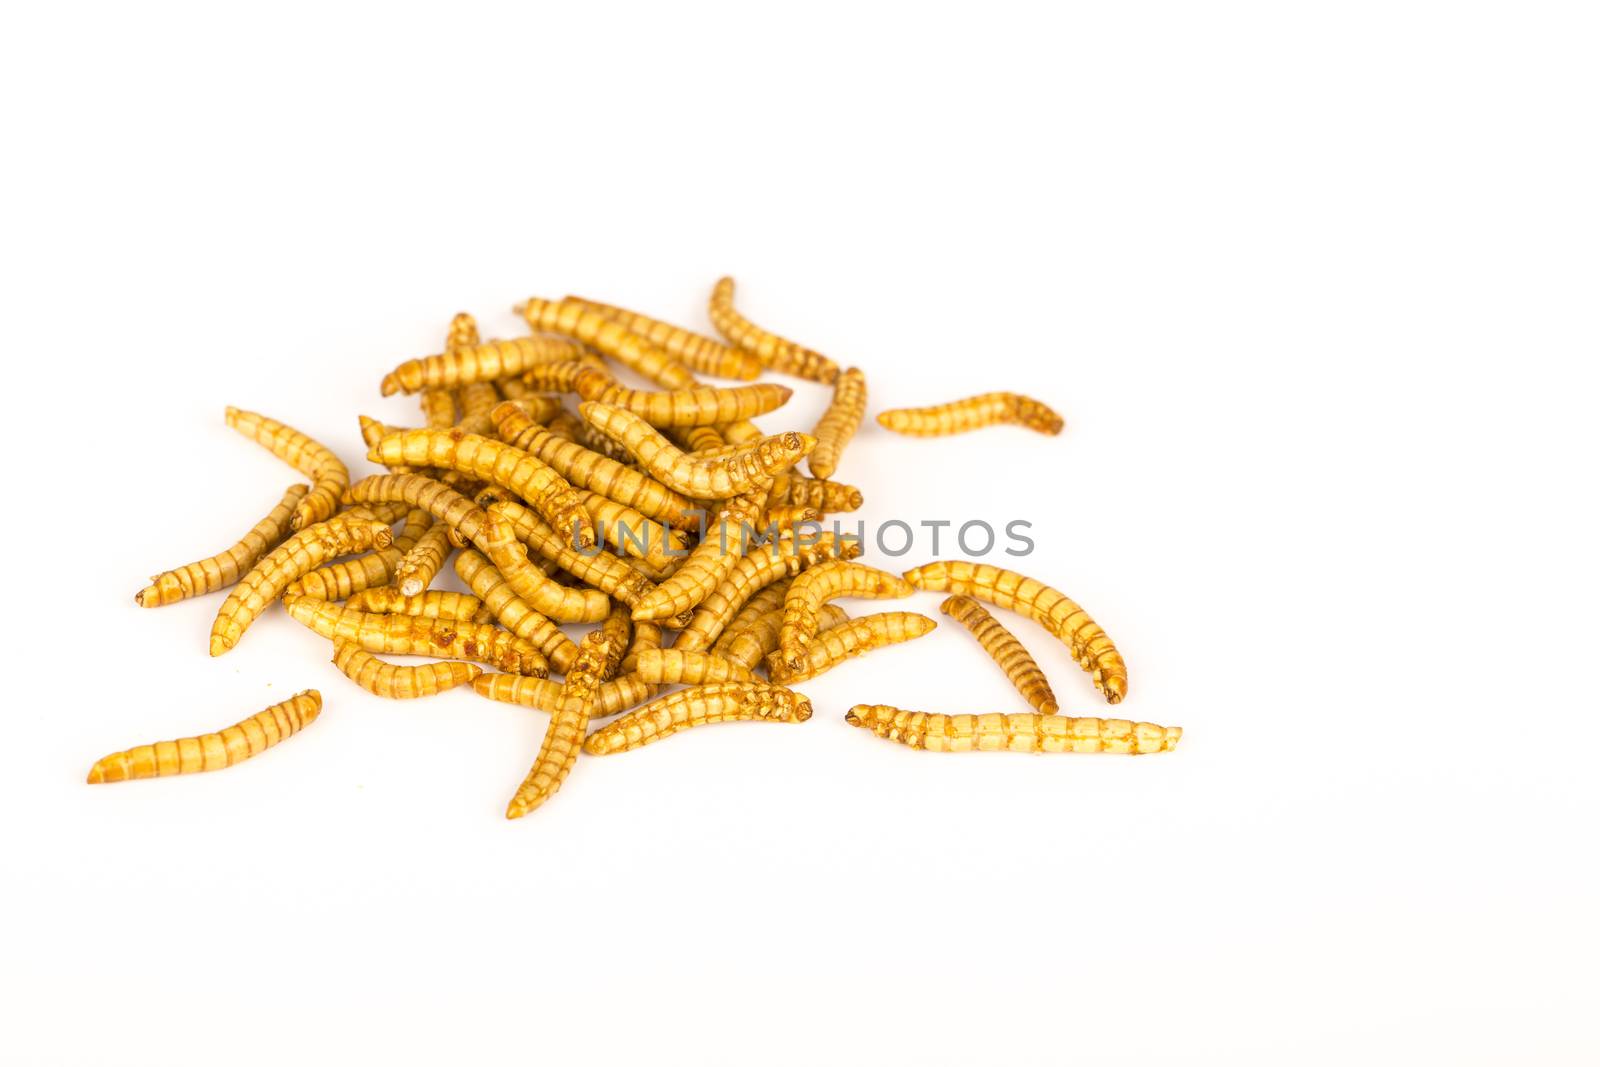 fried insects molitors close up, Protein rich future food